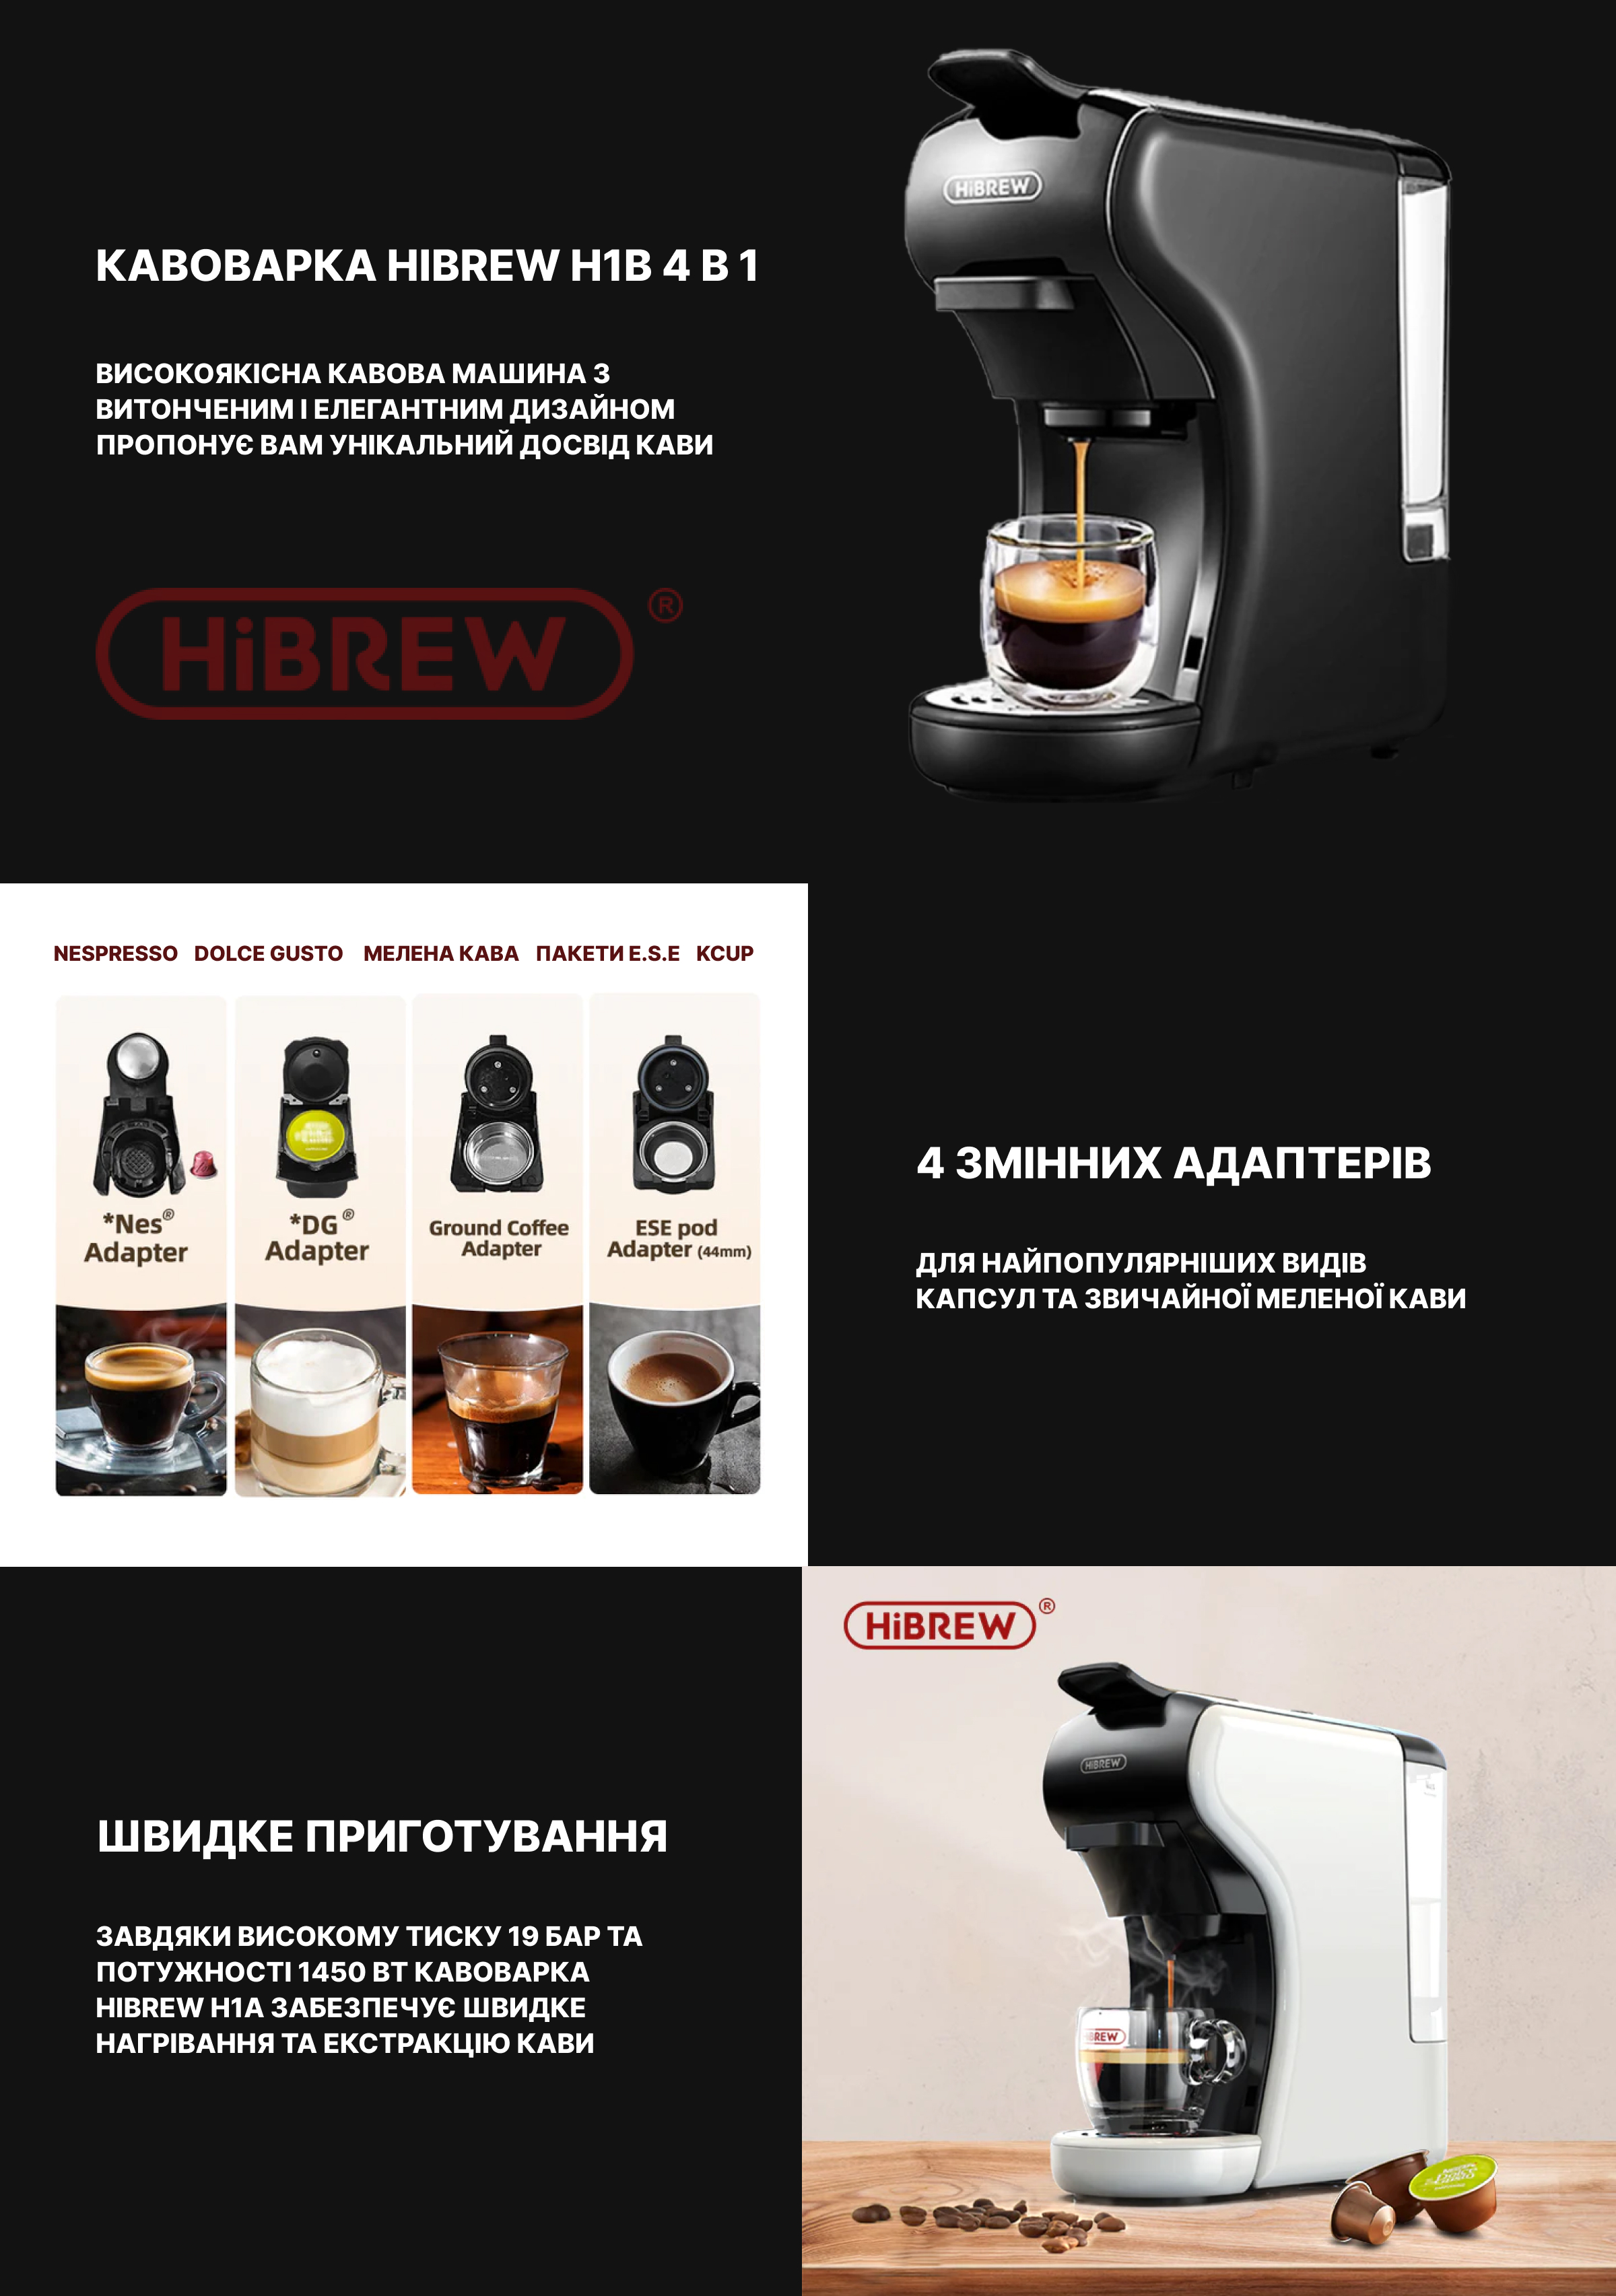 HiBREW 5 in 1 H1B